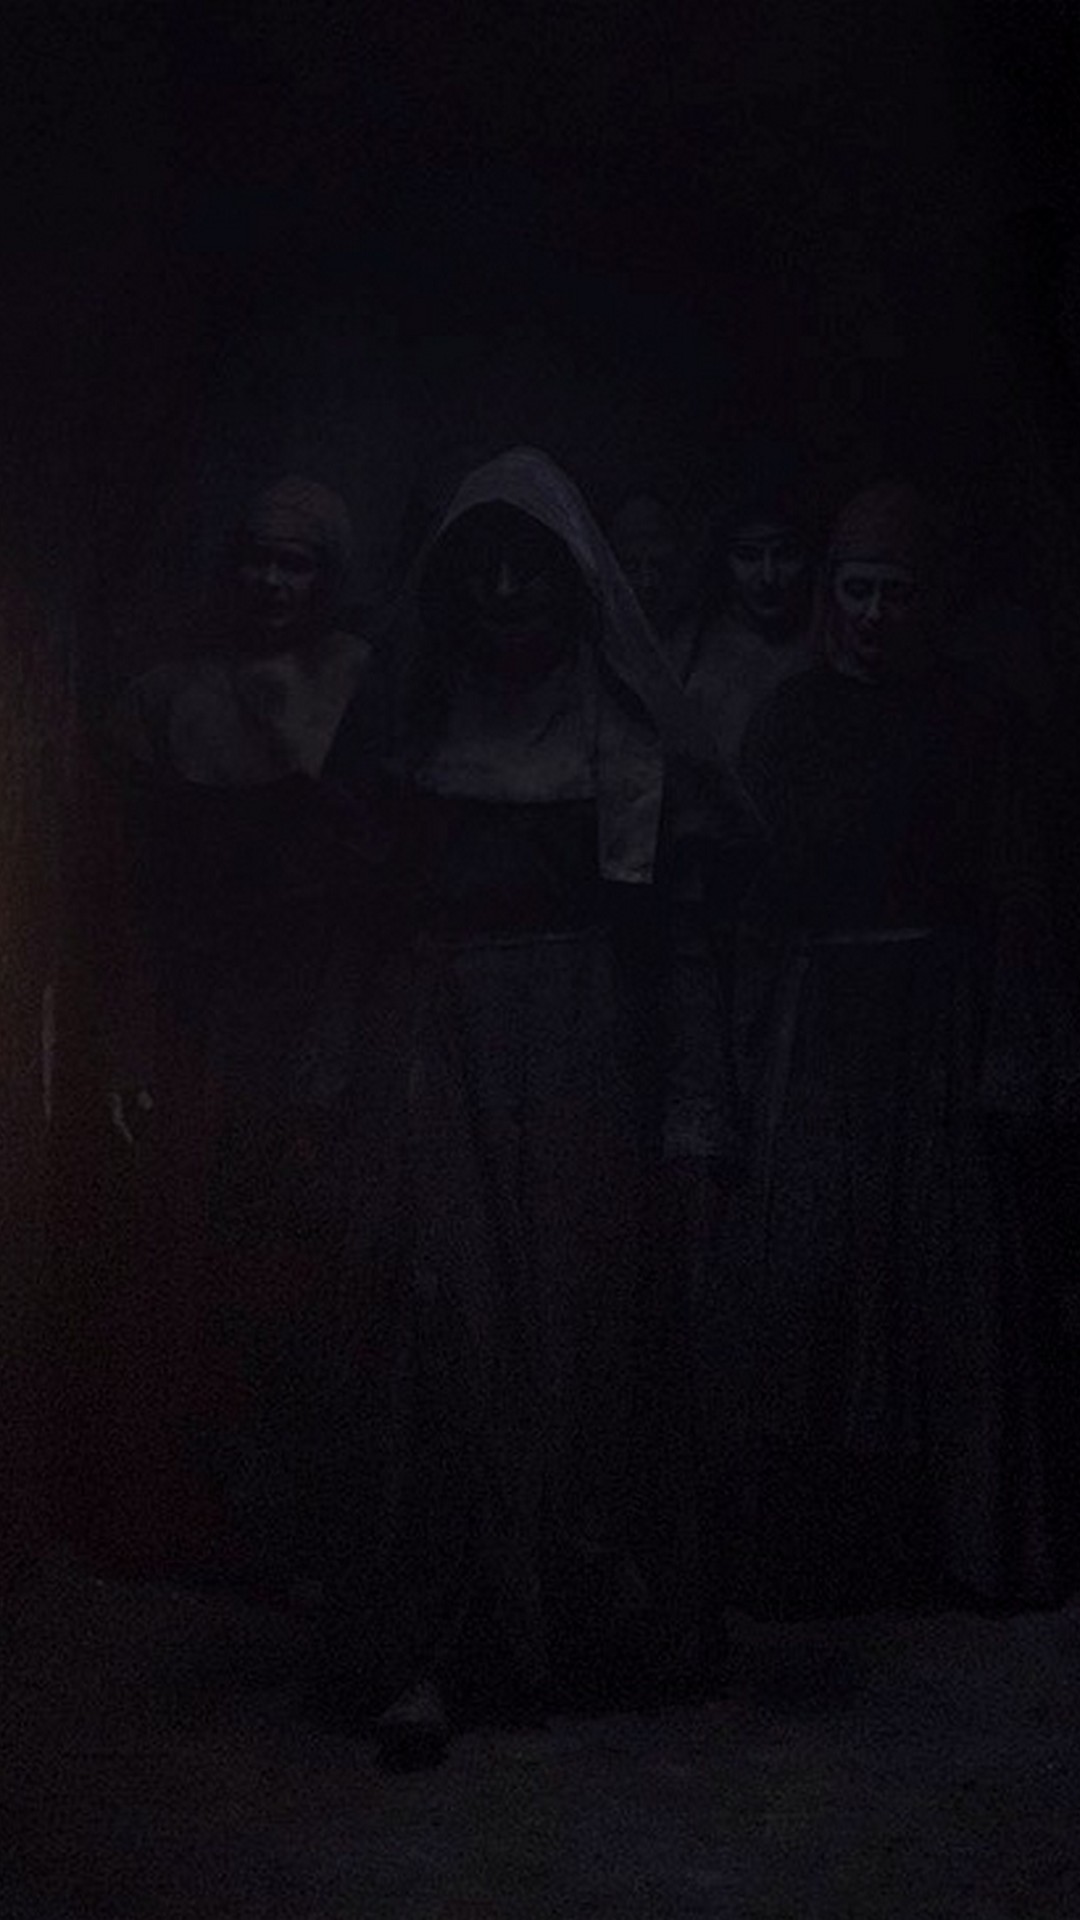 Wallpaper The Nun Valak Android with image resolution 1080x1920 pixel. You can make this wallpaper for your Android backgrounds, Tablet, Smartphones Screensavers and Mobile Phone Lock Screen